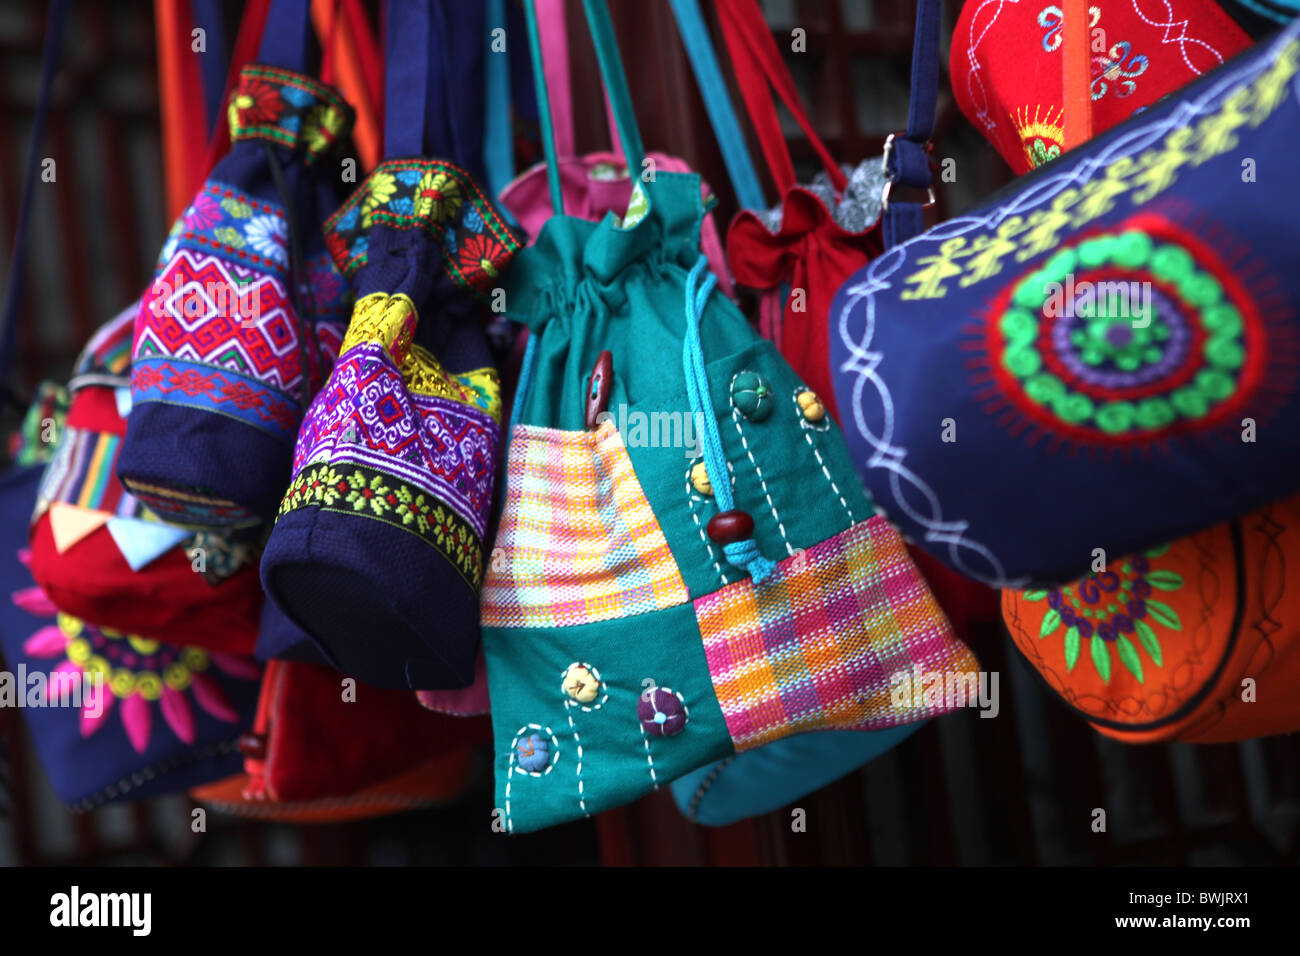 Close-up View Of Indian Handmade Bags In Shop Display Stock Photo, Picture  and Royalty Free Image. Image 193352125.